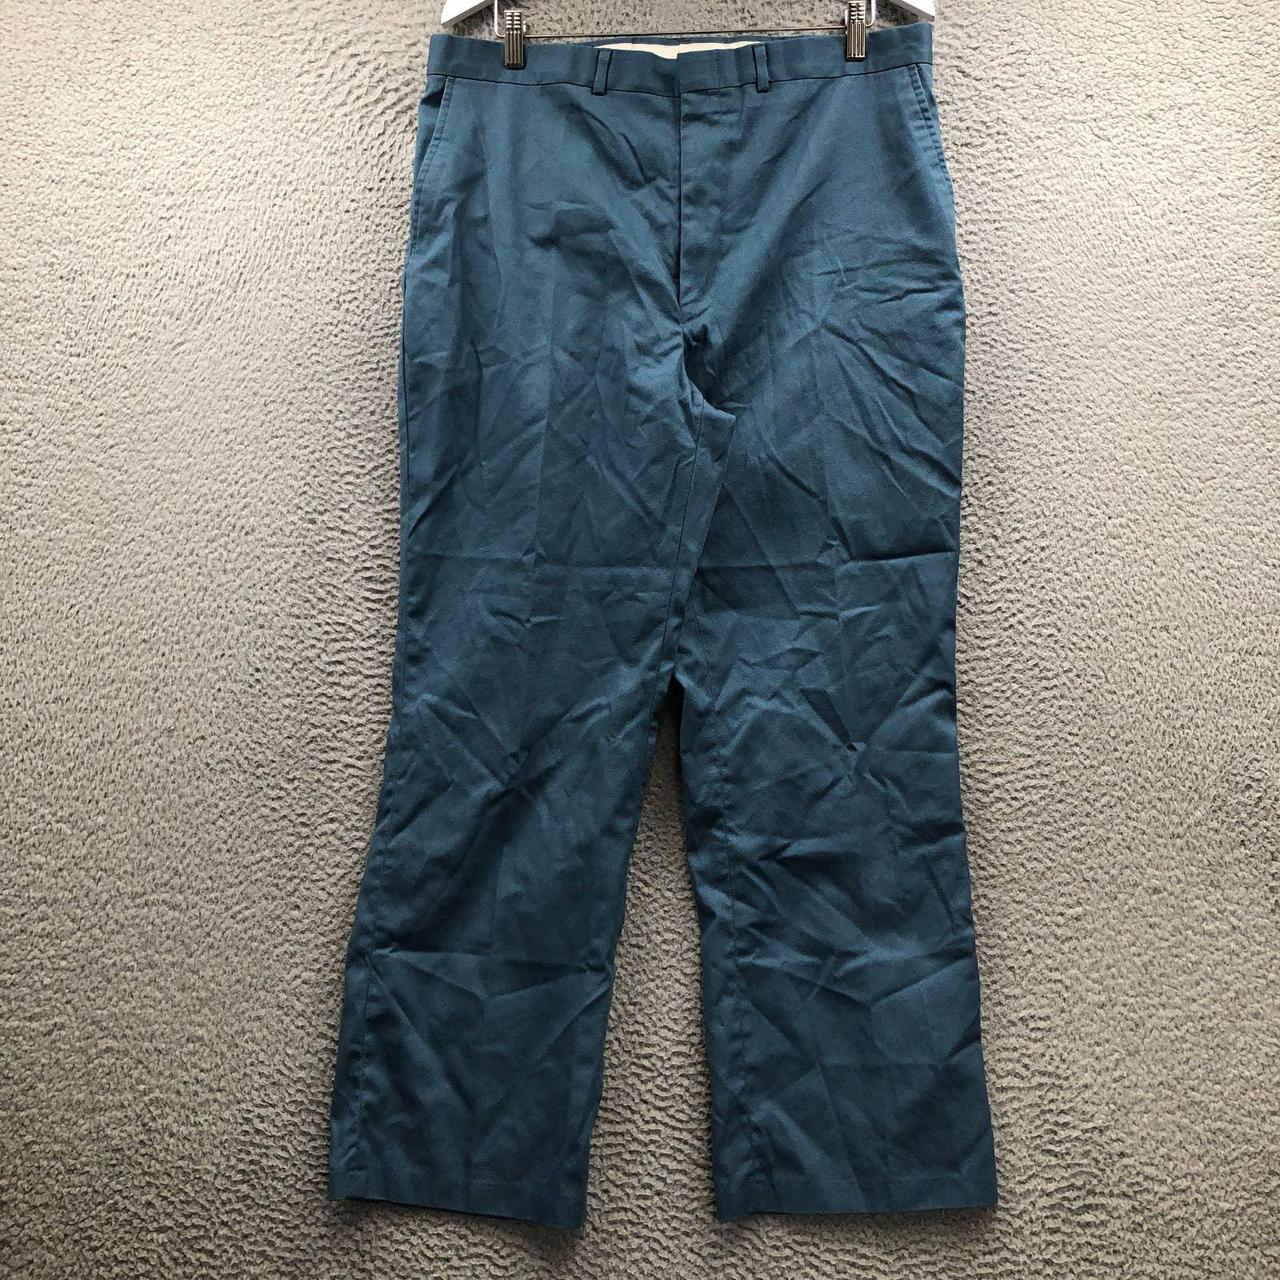 Palmer Trousers